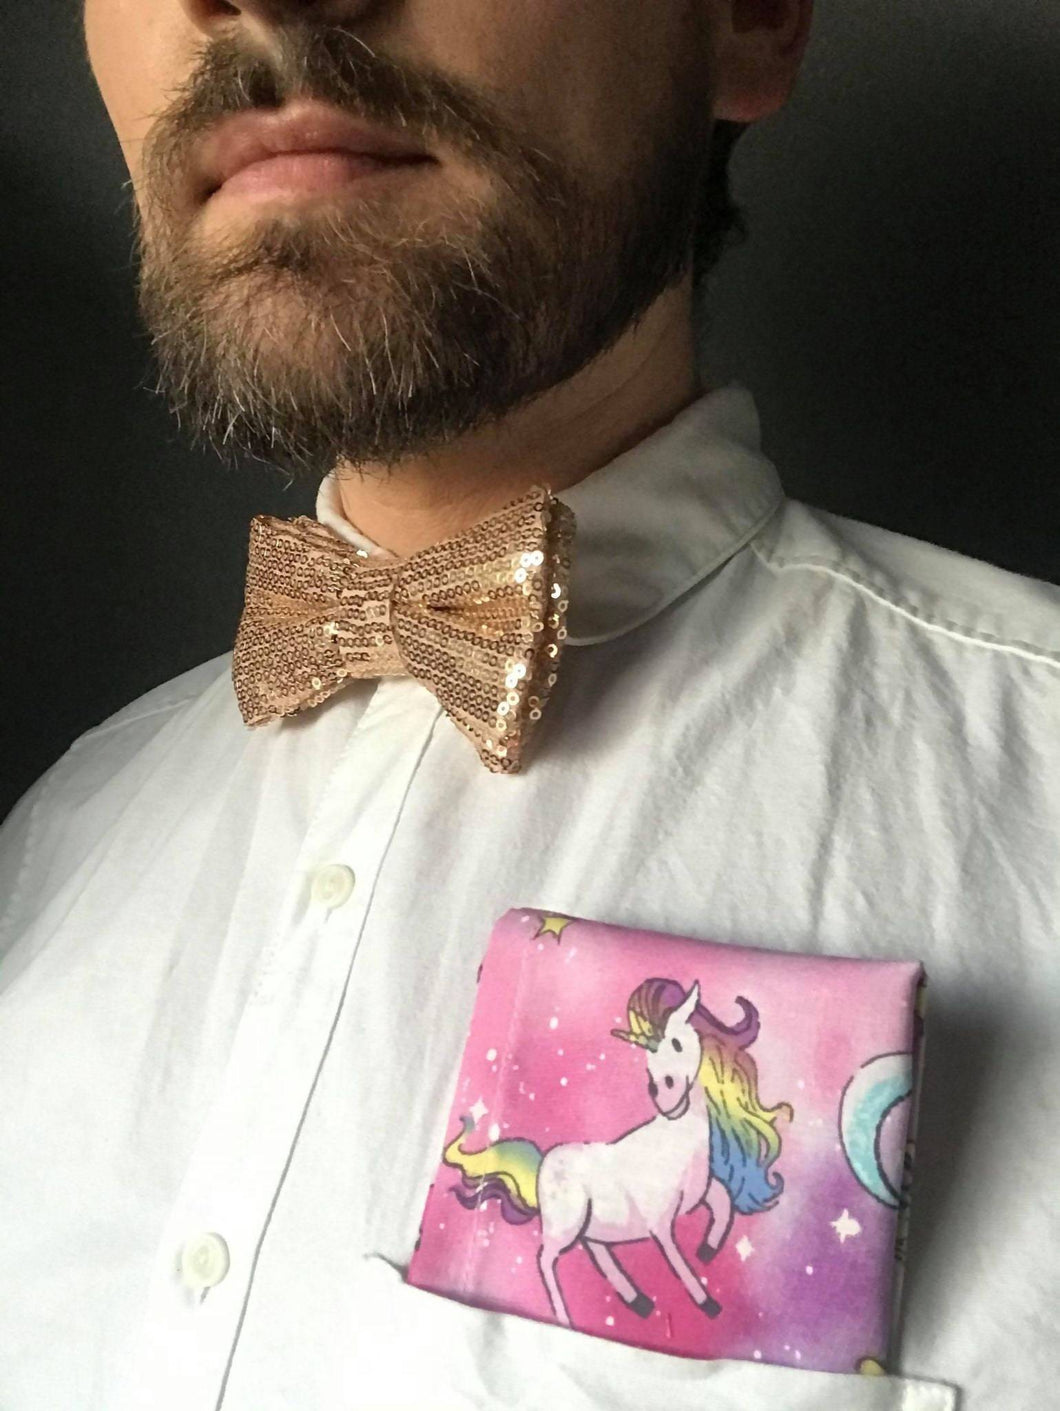 Gold Sequin Bow Tie with Unicorn Print Pocket Square